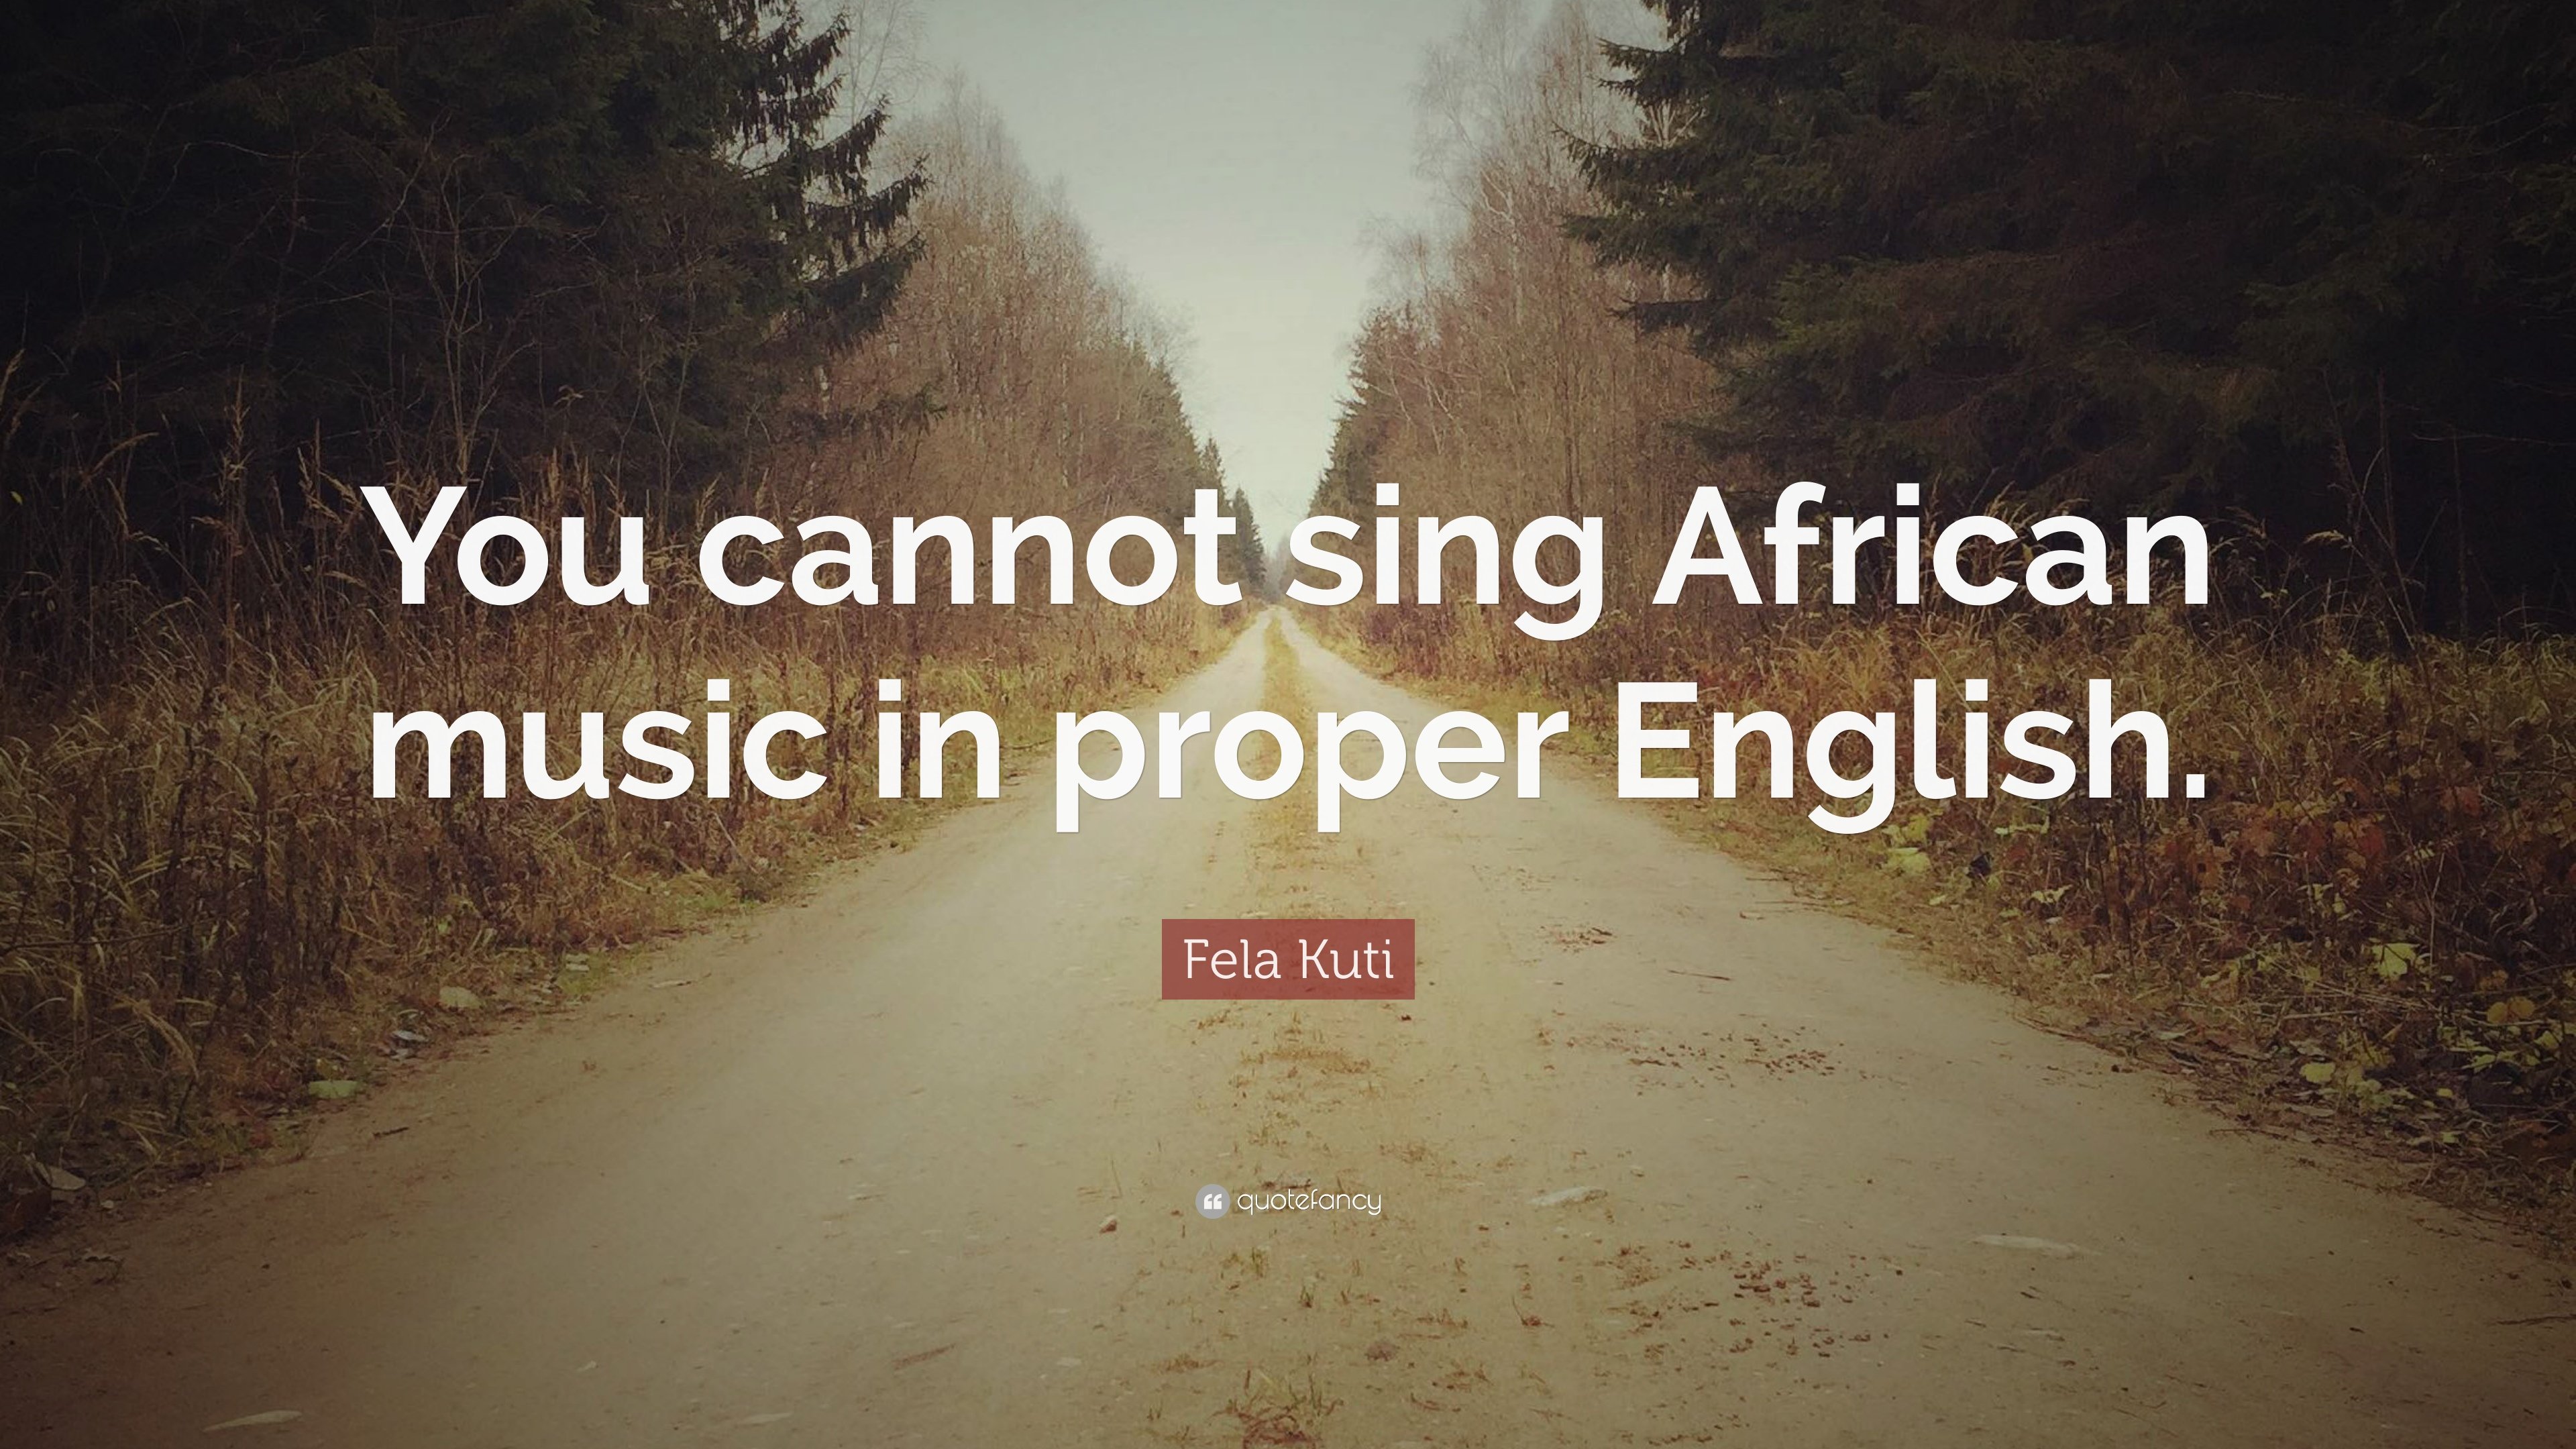 Fela Kuti Quote: “You cannot sing African music in proper English